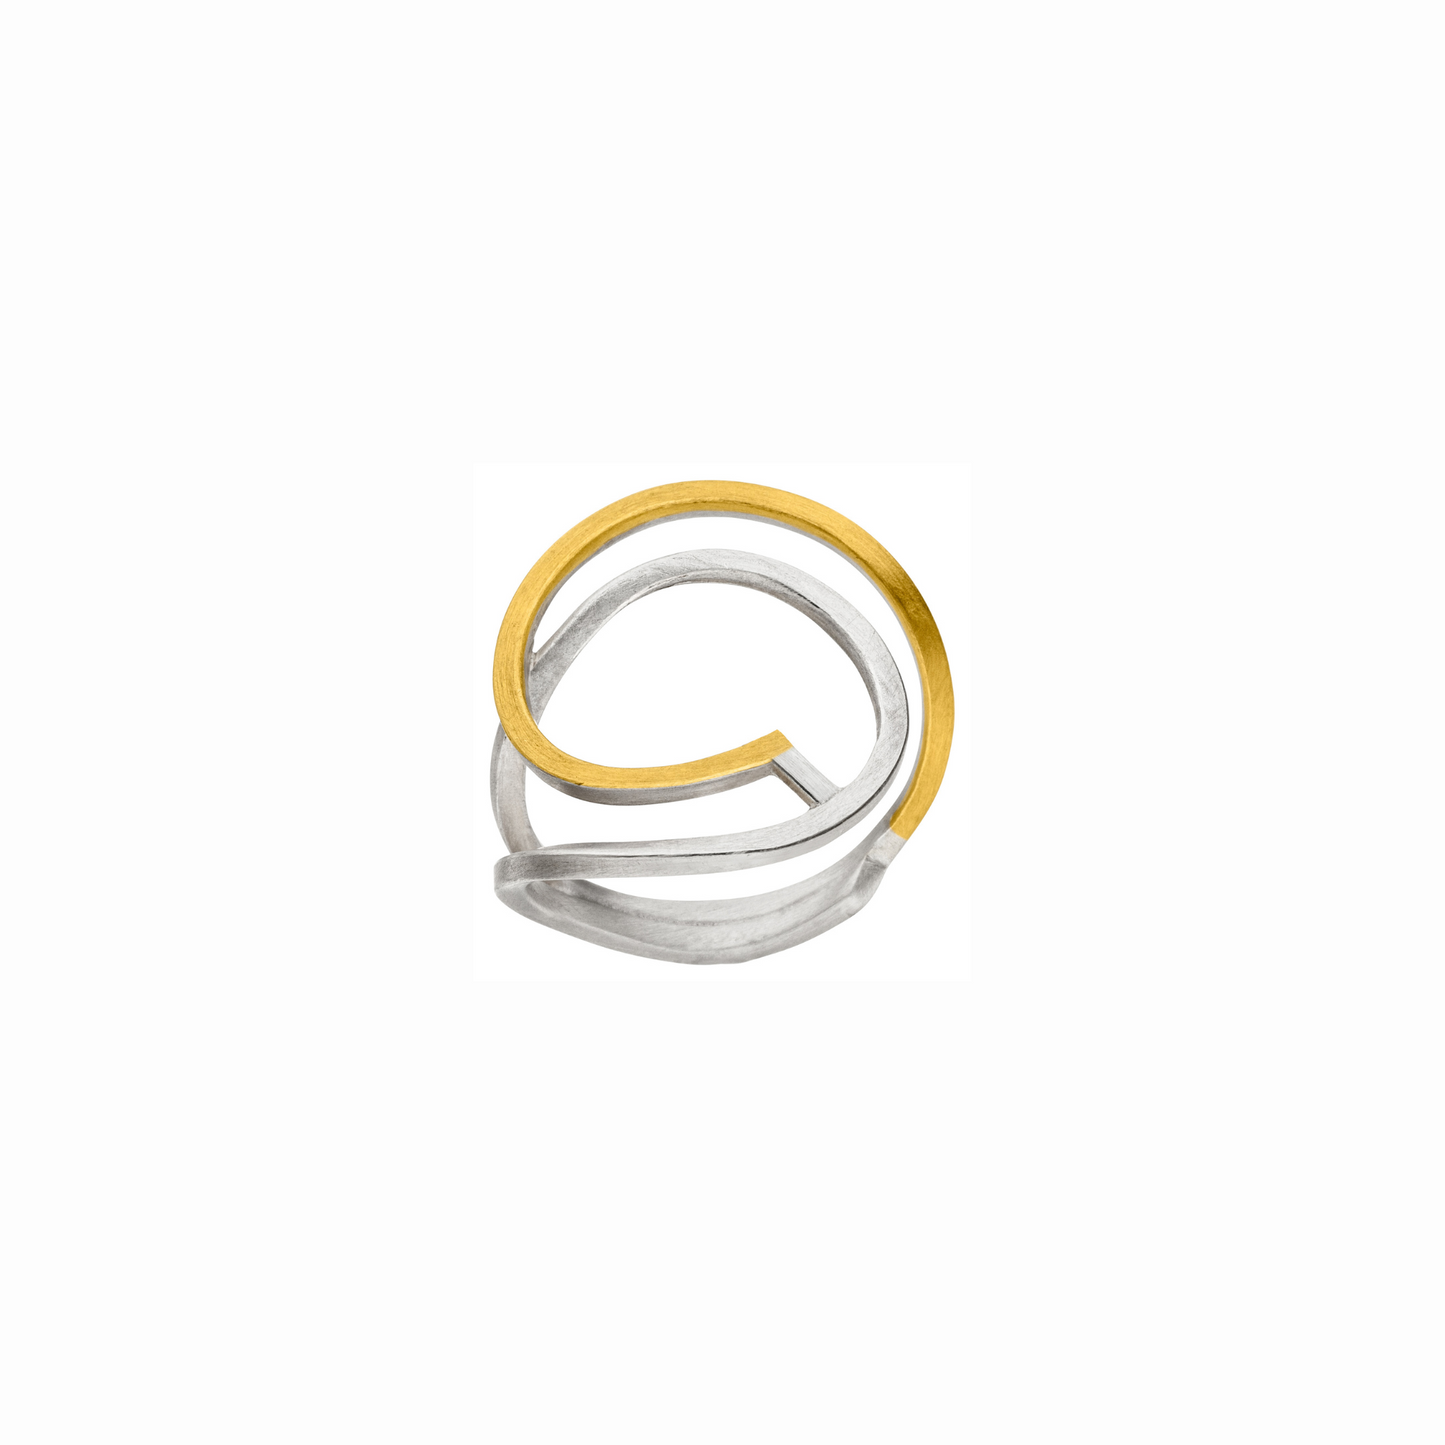 MANU SCHMUCK - Silver and Gold Ring